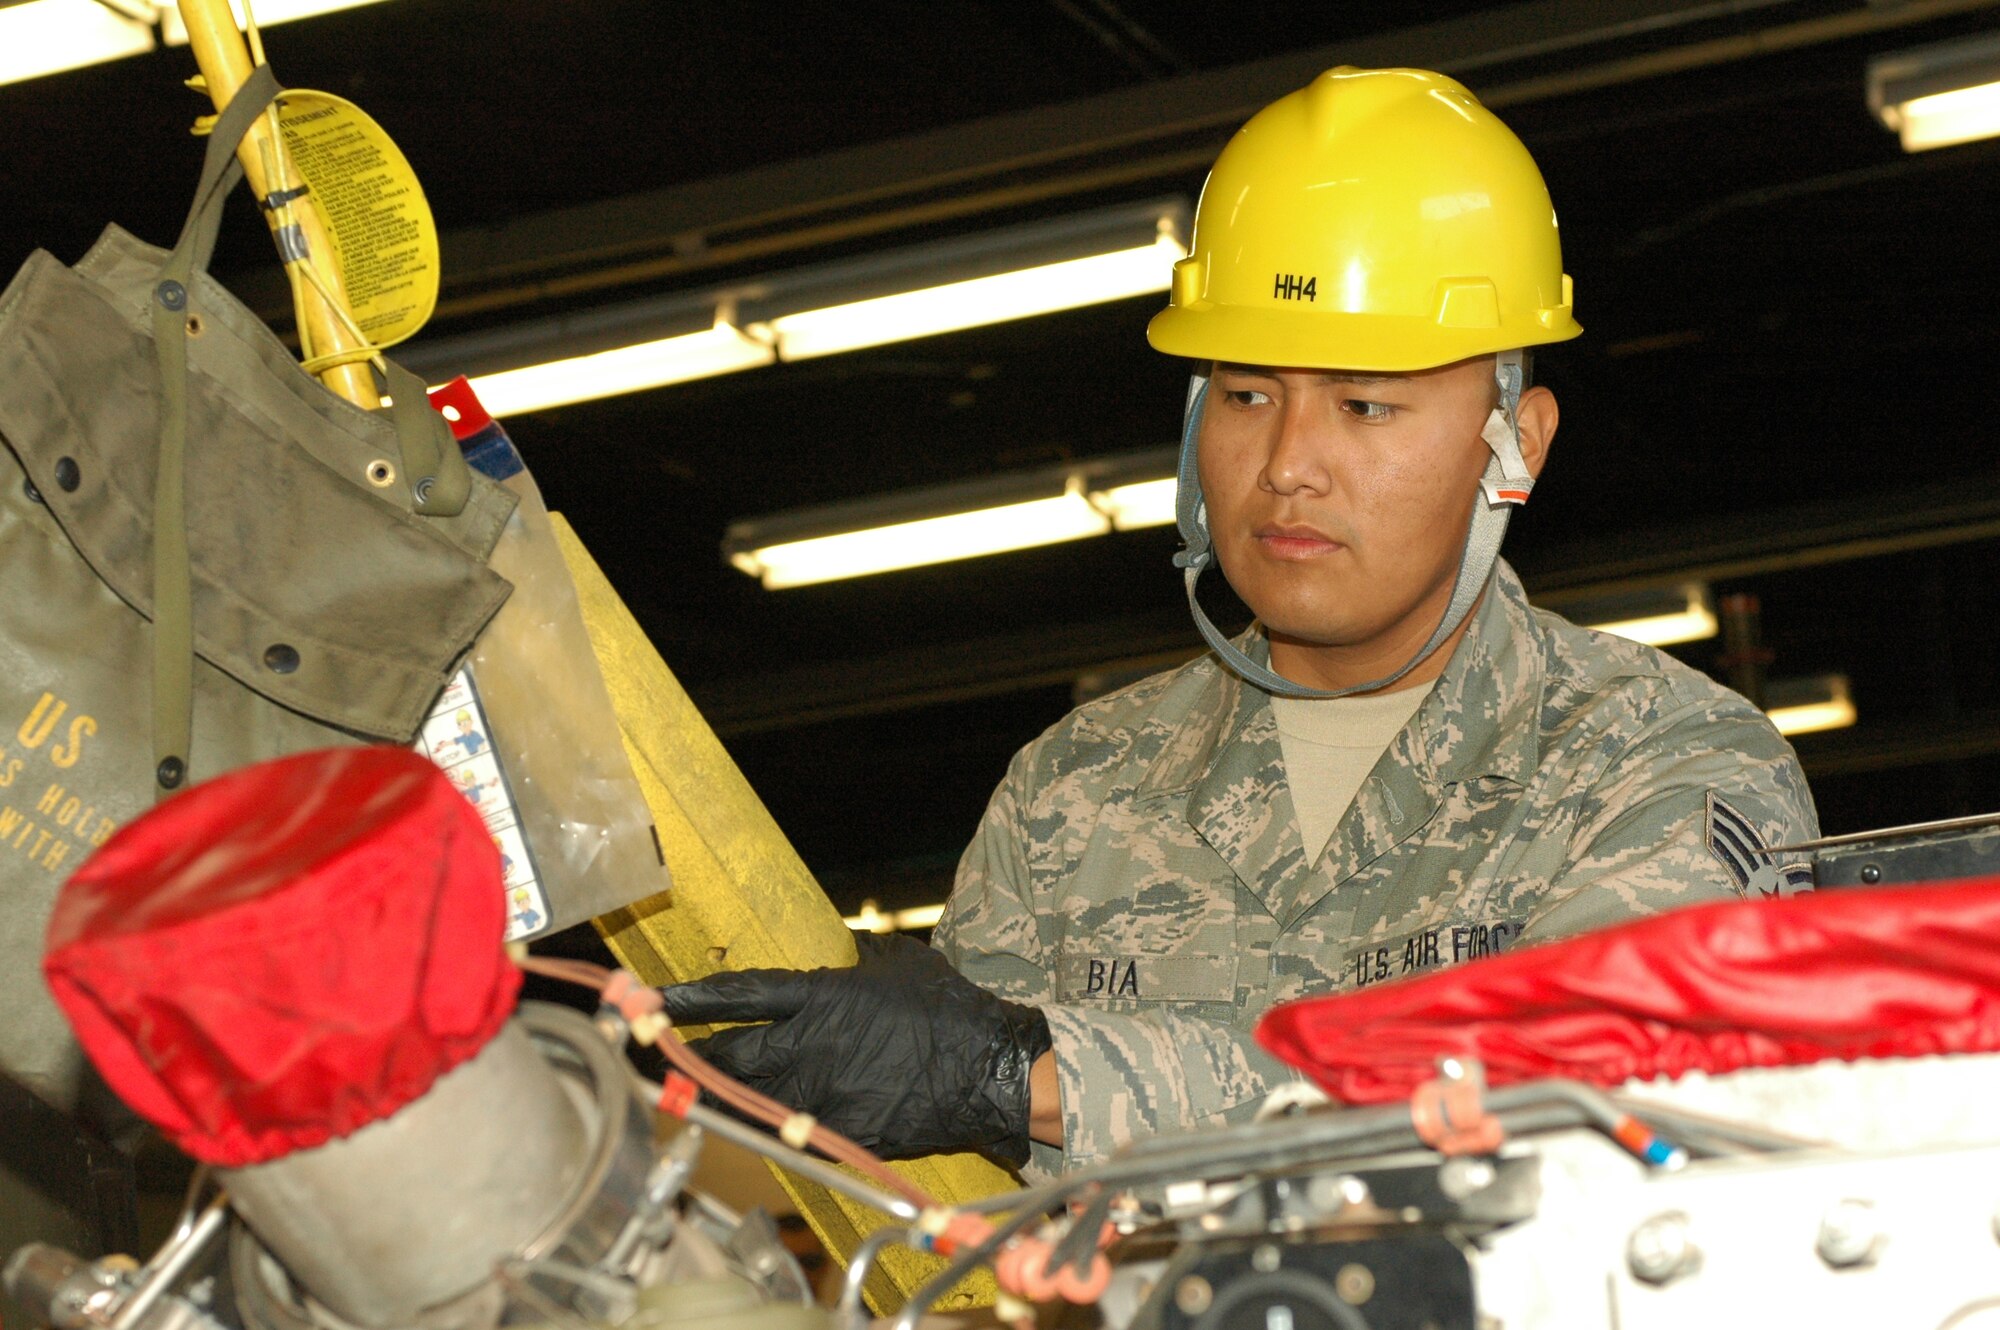 Senior Airman Andre Bia, an Aerospace Ground Equipment technician with the 162nd Fighter Wing, operates a lift to extract an engine from a piece of AGE. (U.S. Air Force photo by Staff Sgt. Heather Davis/Released)